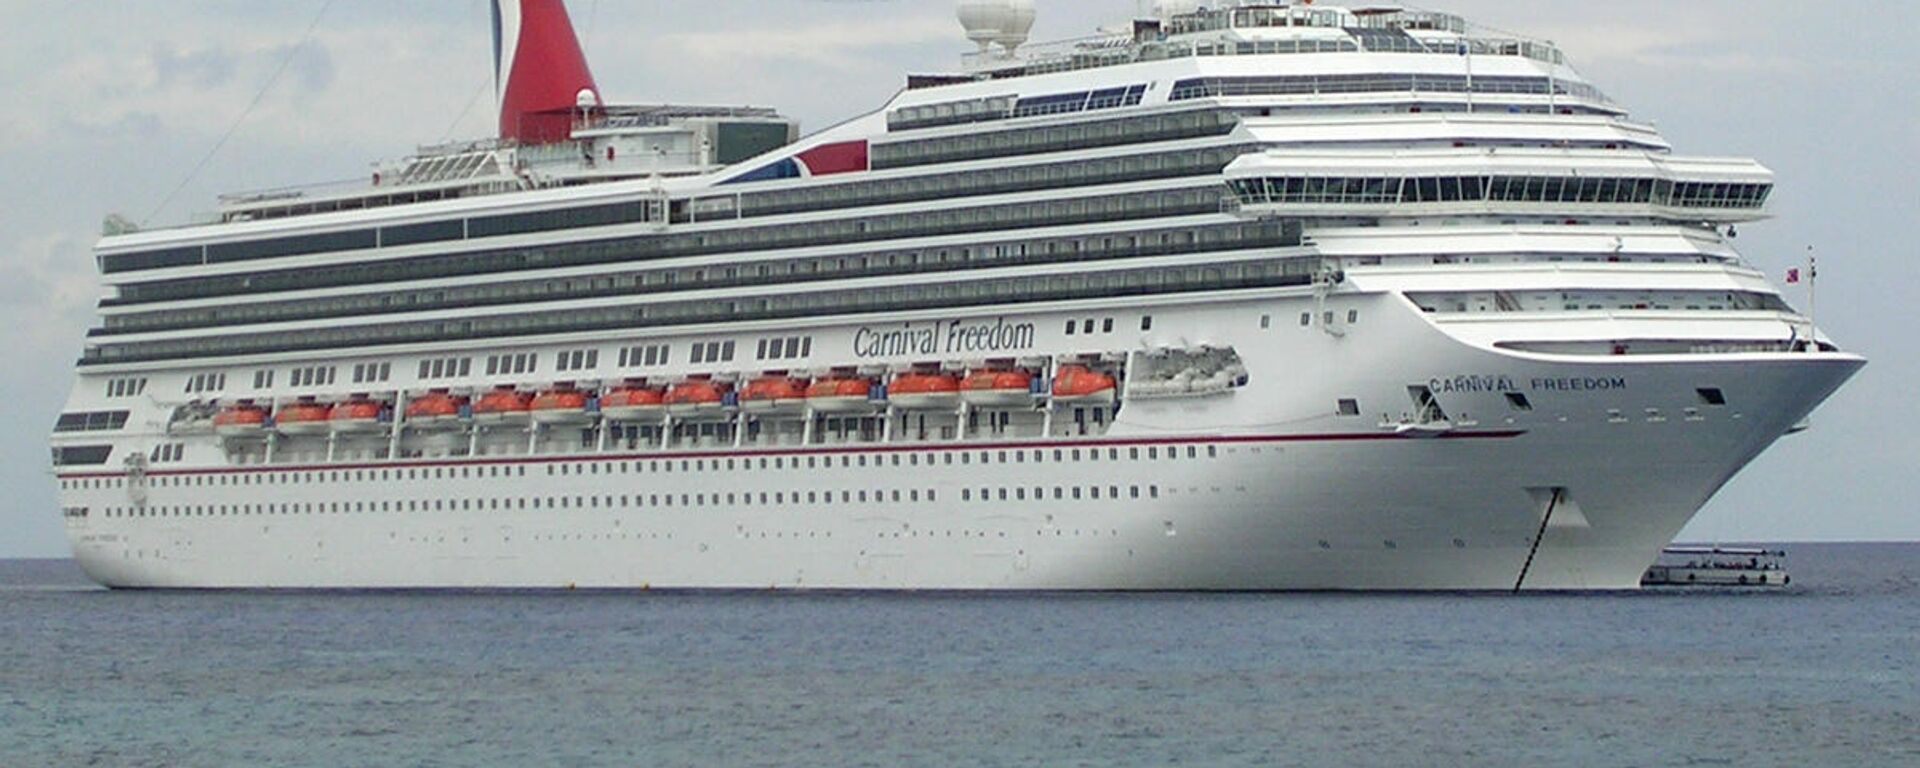 Carnival Freedom is in the harbor at George Town, Grand Cayman. It is one of Carnival's ships entering cruise service in 2007. It has a lot of balconies. The ship is 952 ft (290 m) long. It lists capacity of carries 2,900 passengers, which might be the meximum if extra capacity in cabins is used. I took this photo from the shore. - Sputnik International, 1920, 25.12.2021